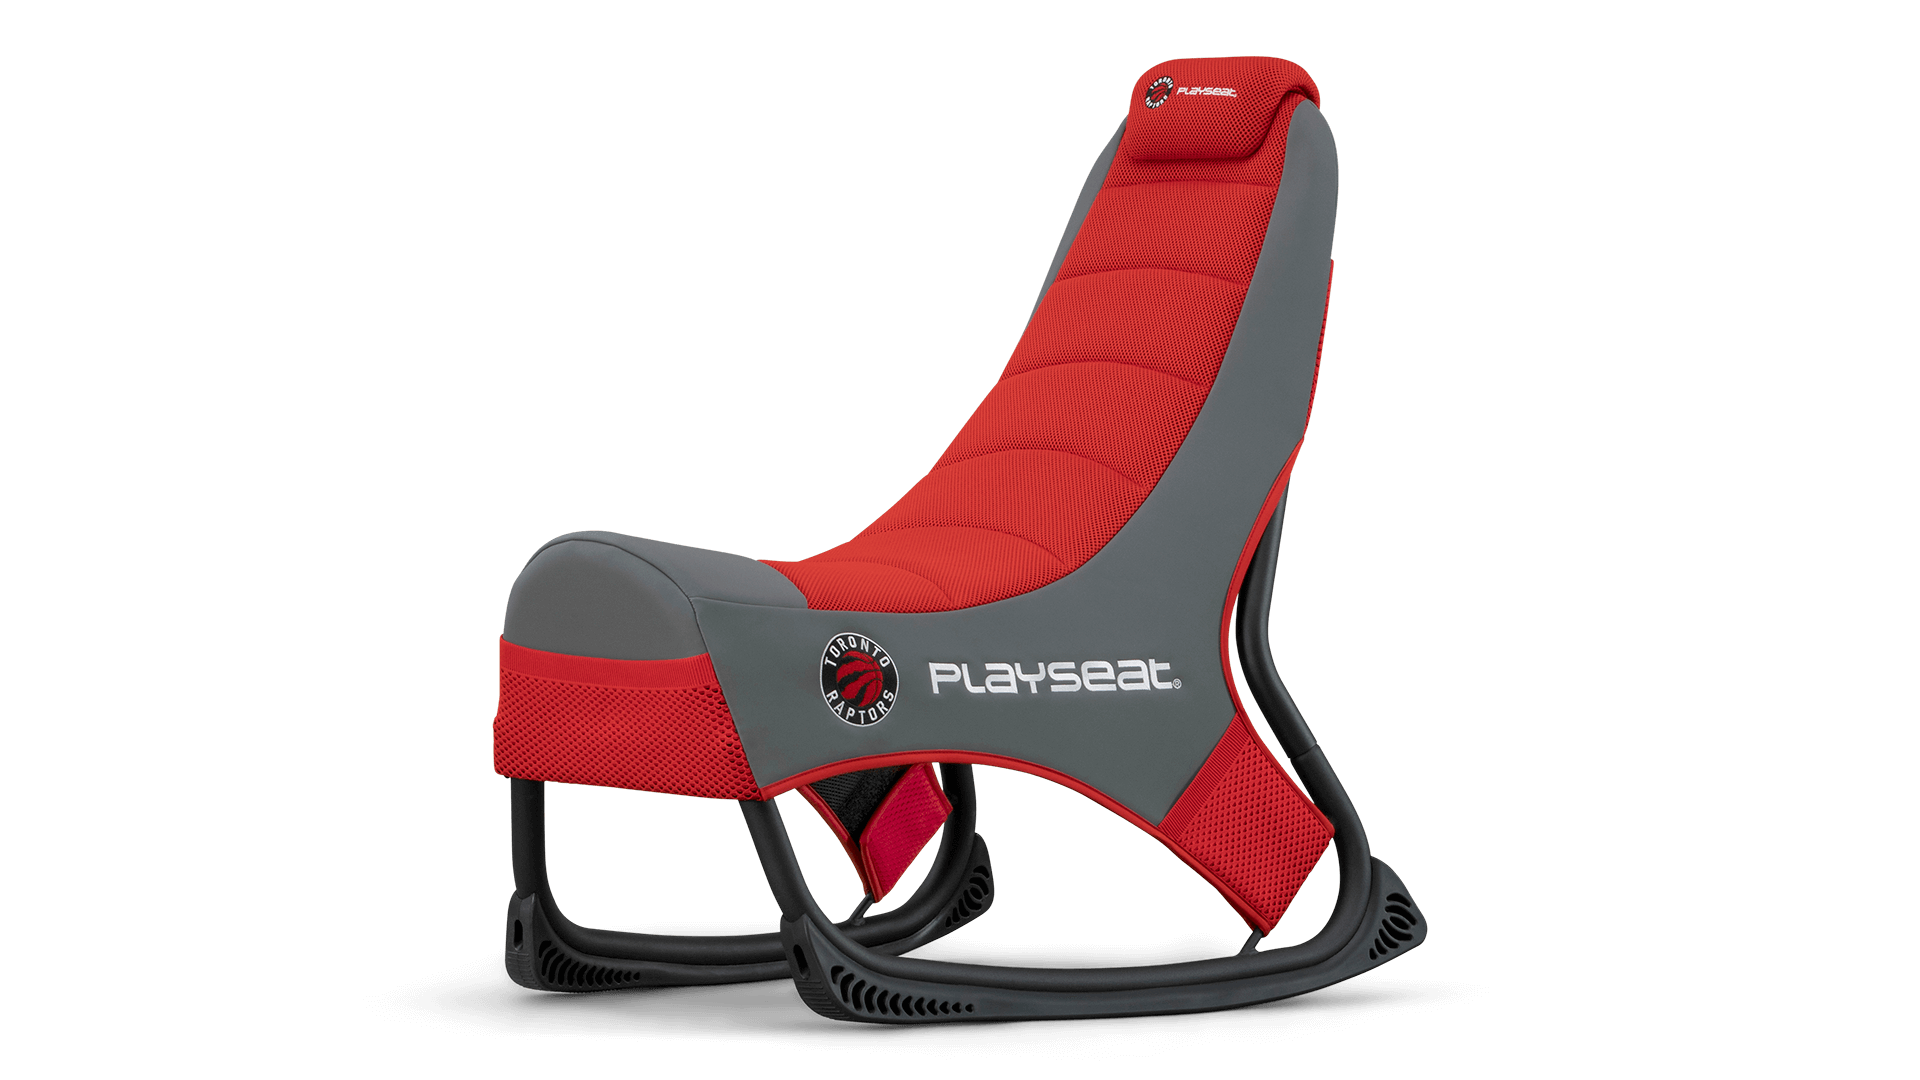 playseat-go-nba-toronto-raptors-gaming-seat-front-angle-view-48-1920x1080.png